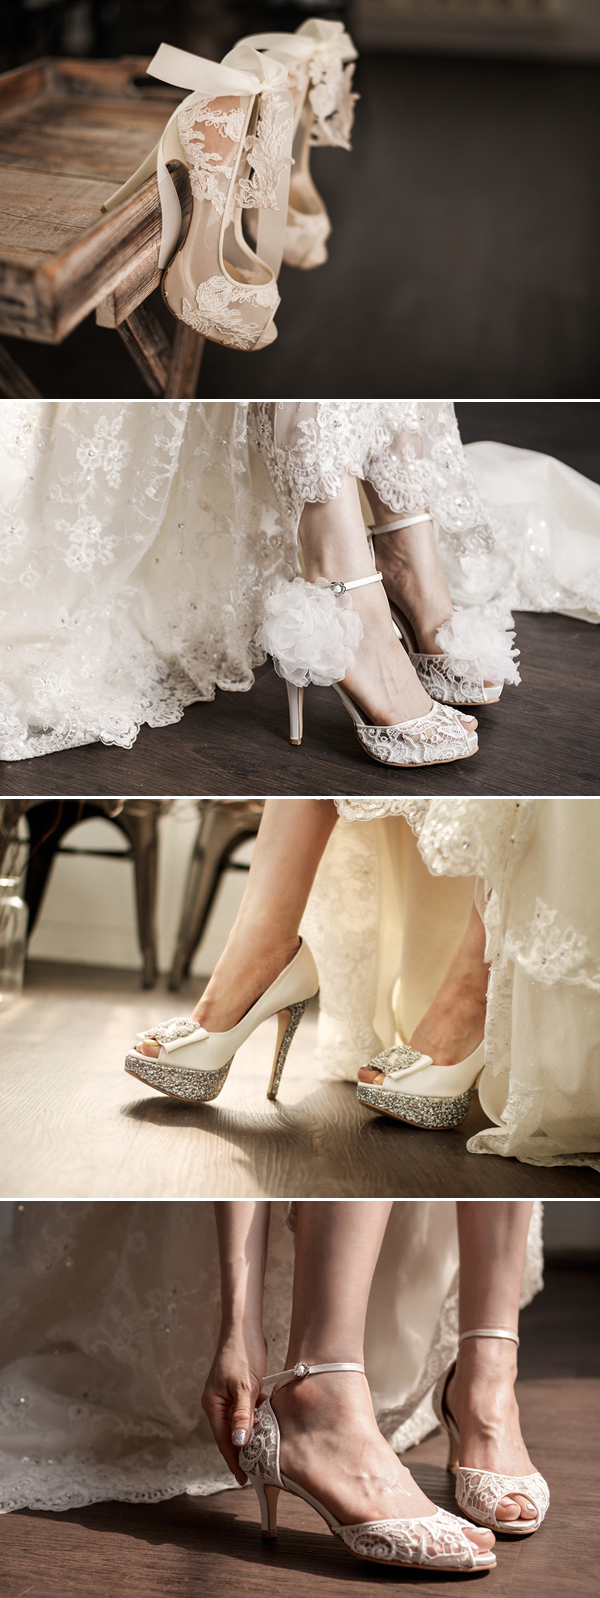 Top 7 Bands Affordable Wedding Shoes You Will Love! - Deer Pearl Flowers